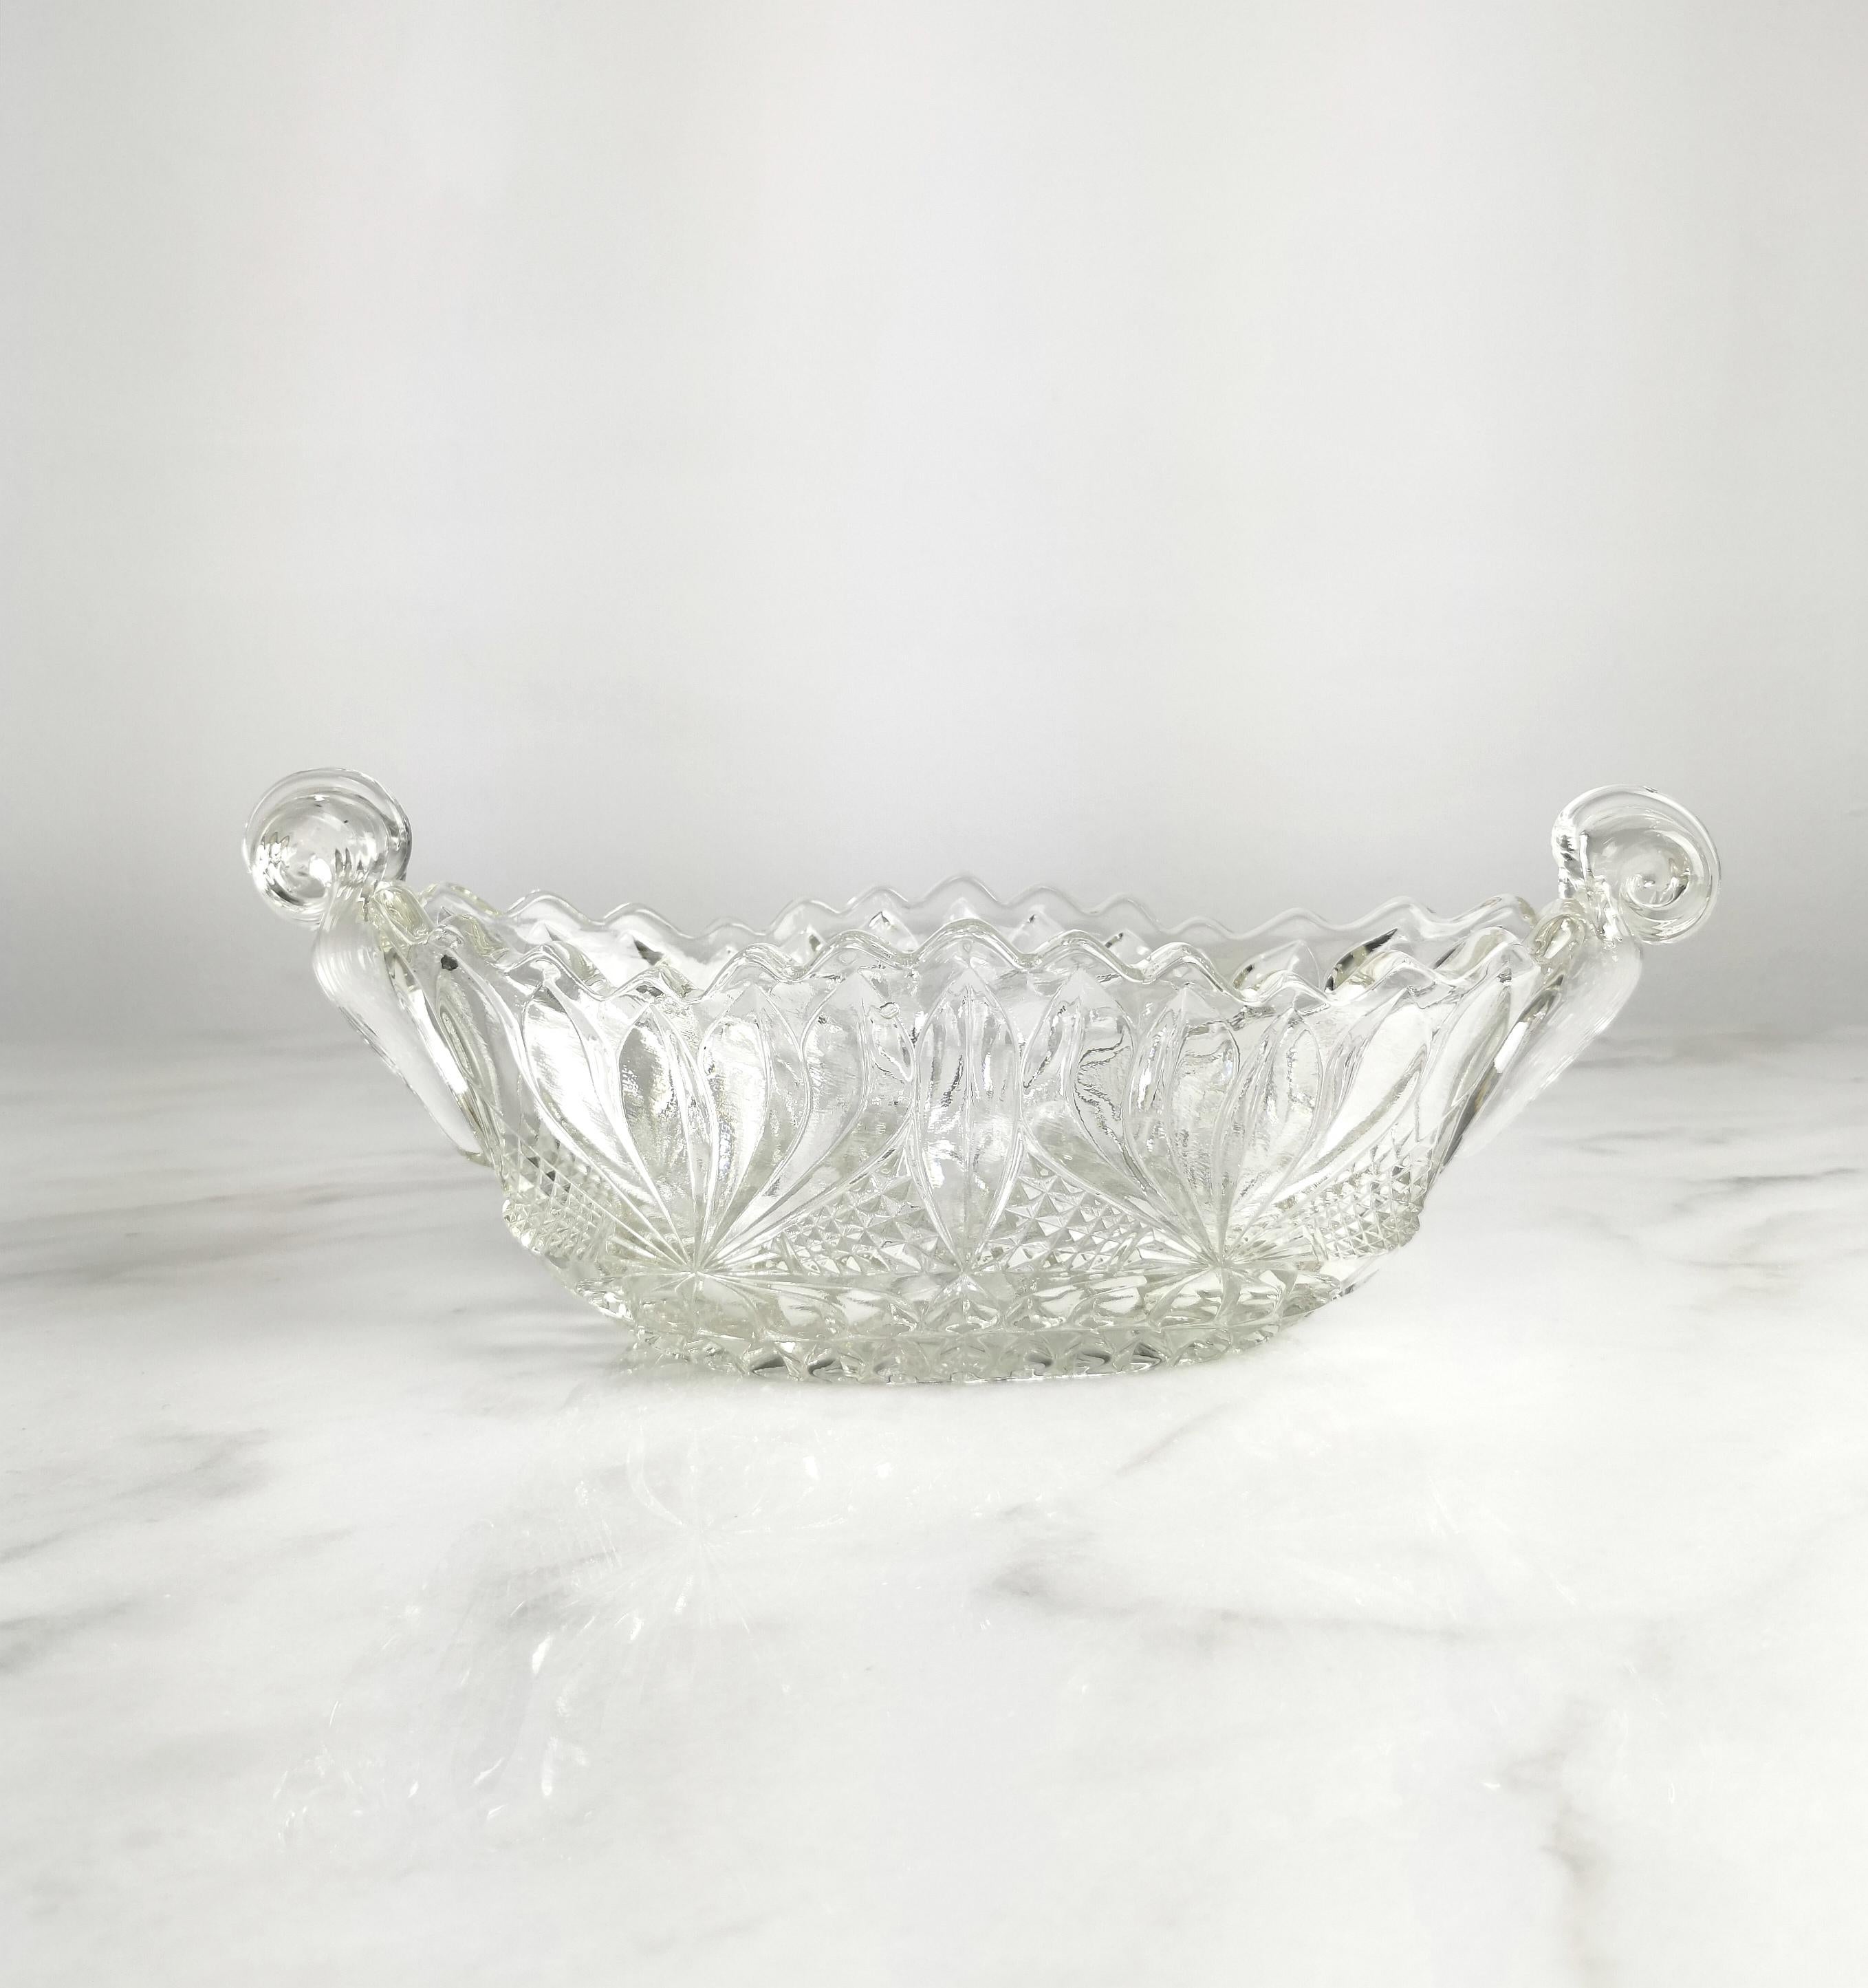 Centerpiece produced in Italy in the 50s.
The 